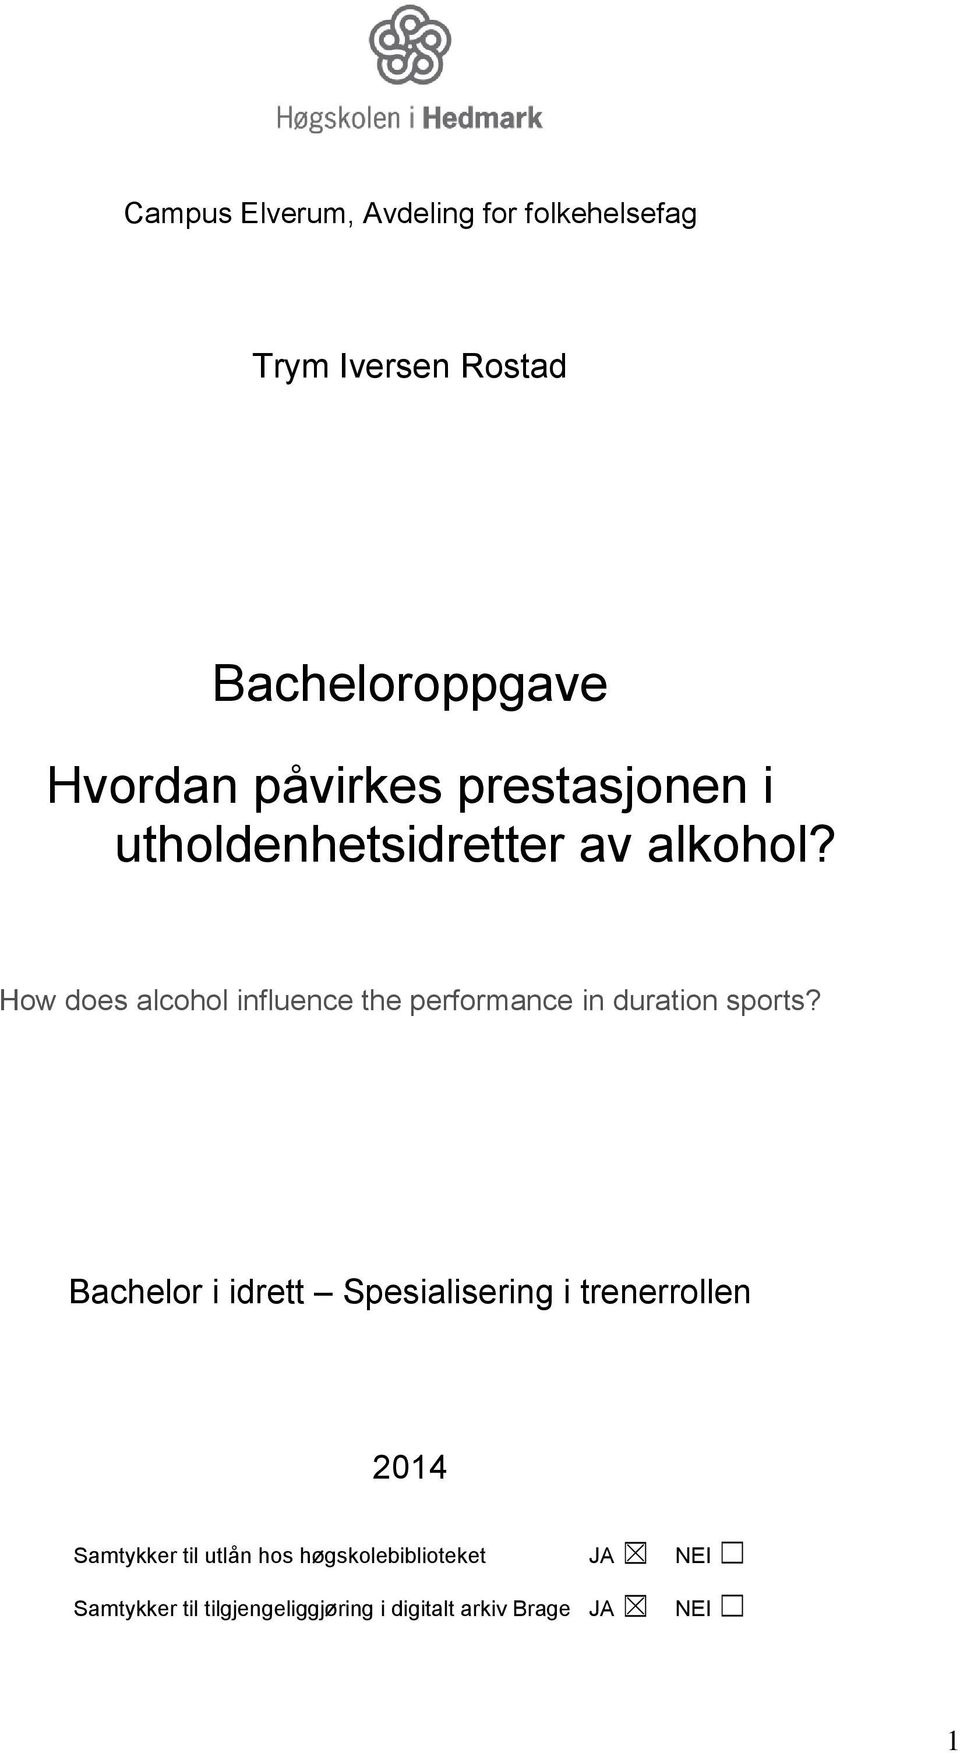 How does alcohol influence the performance in duration sports?